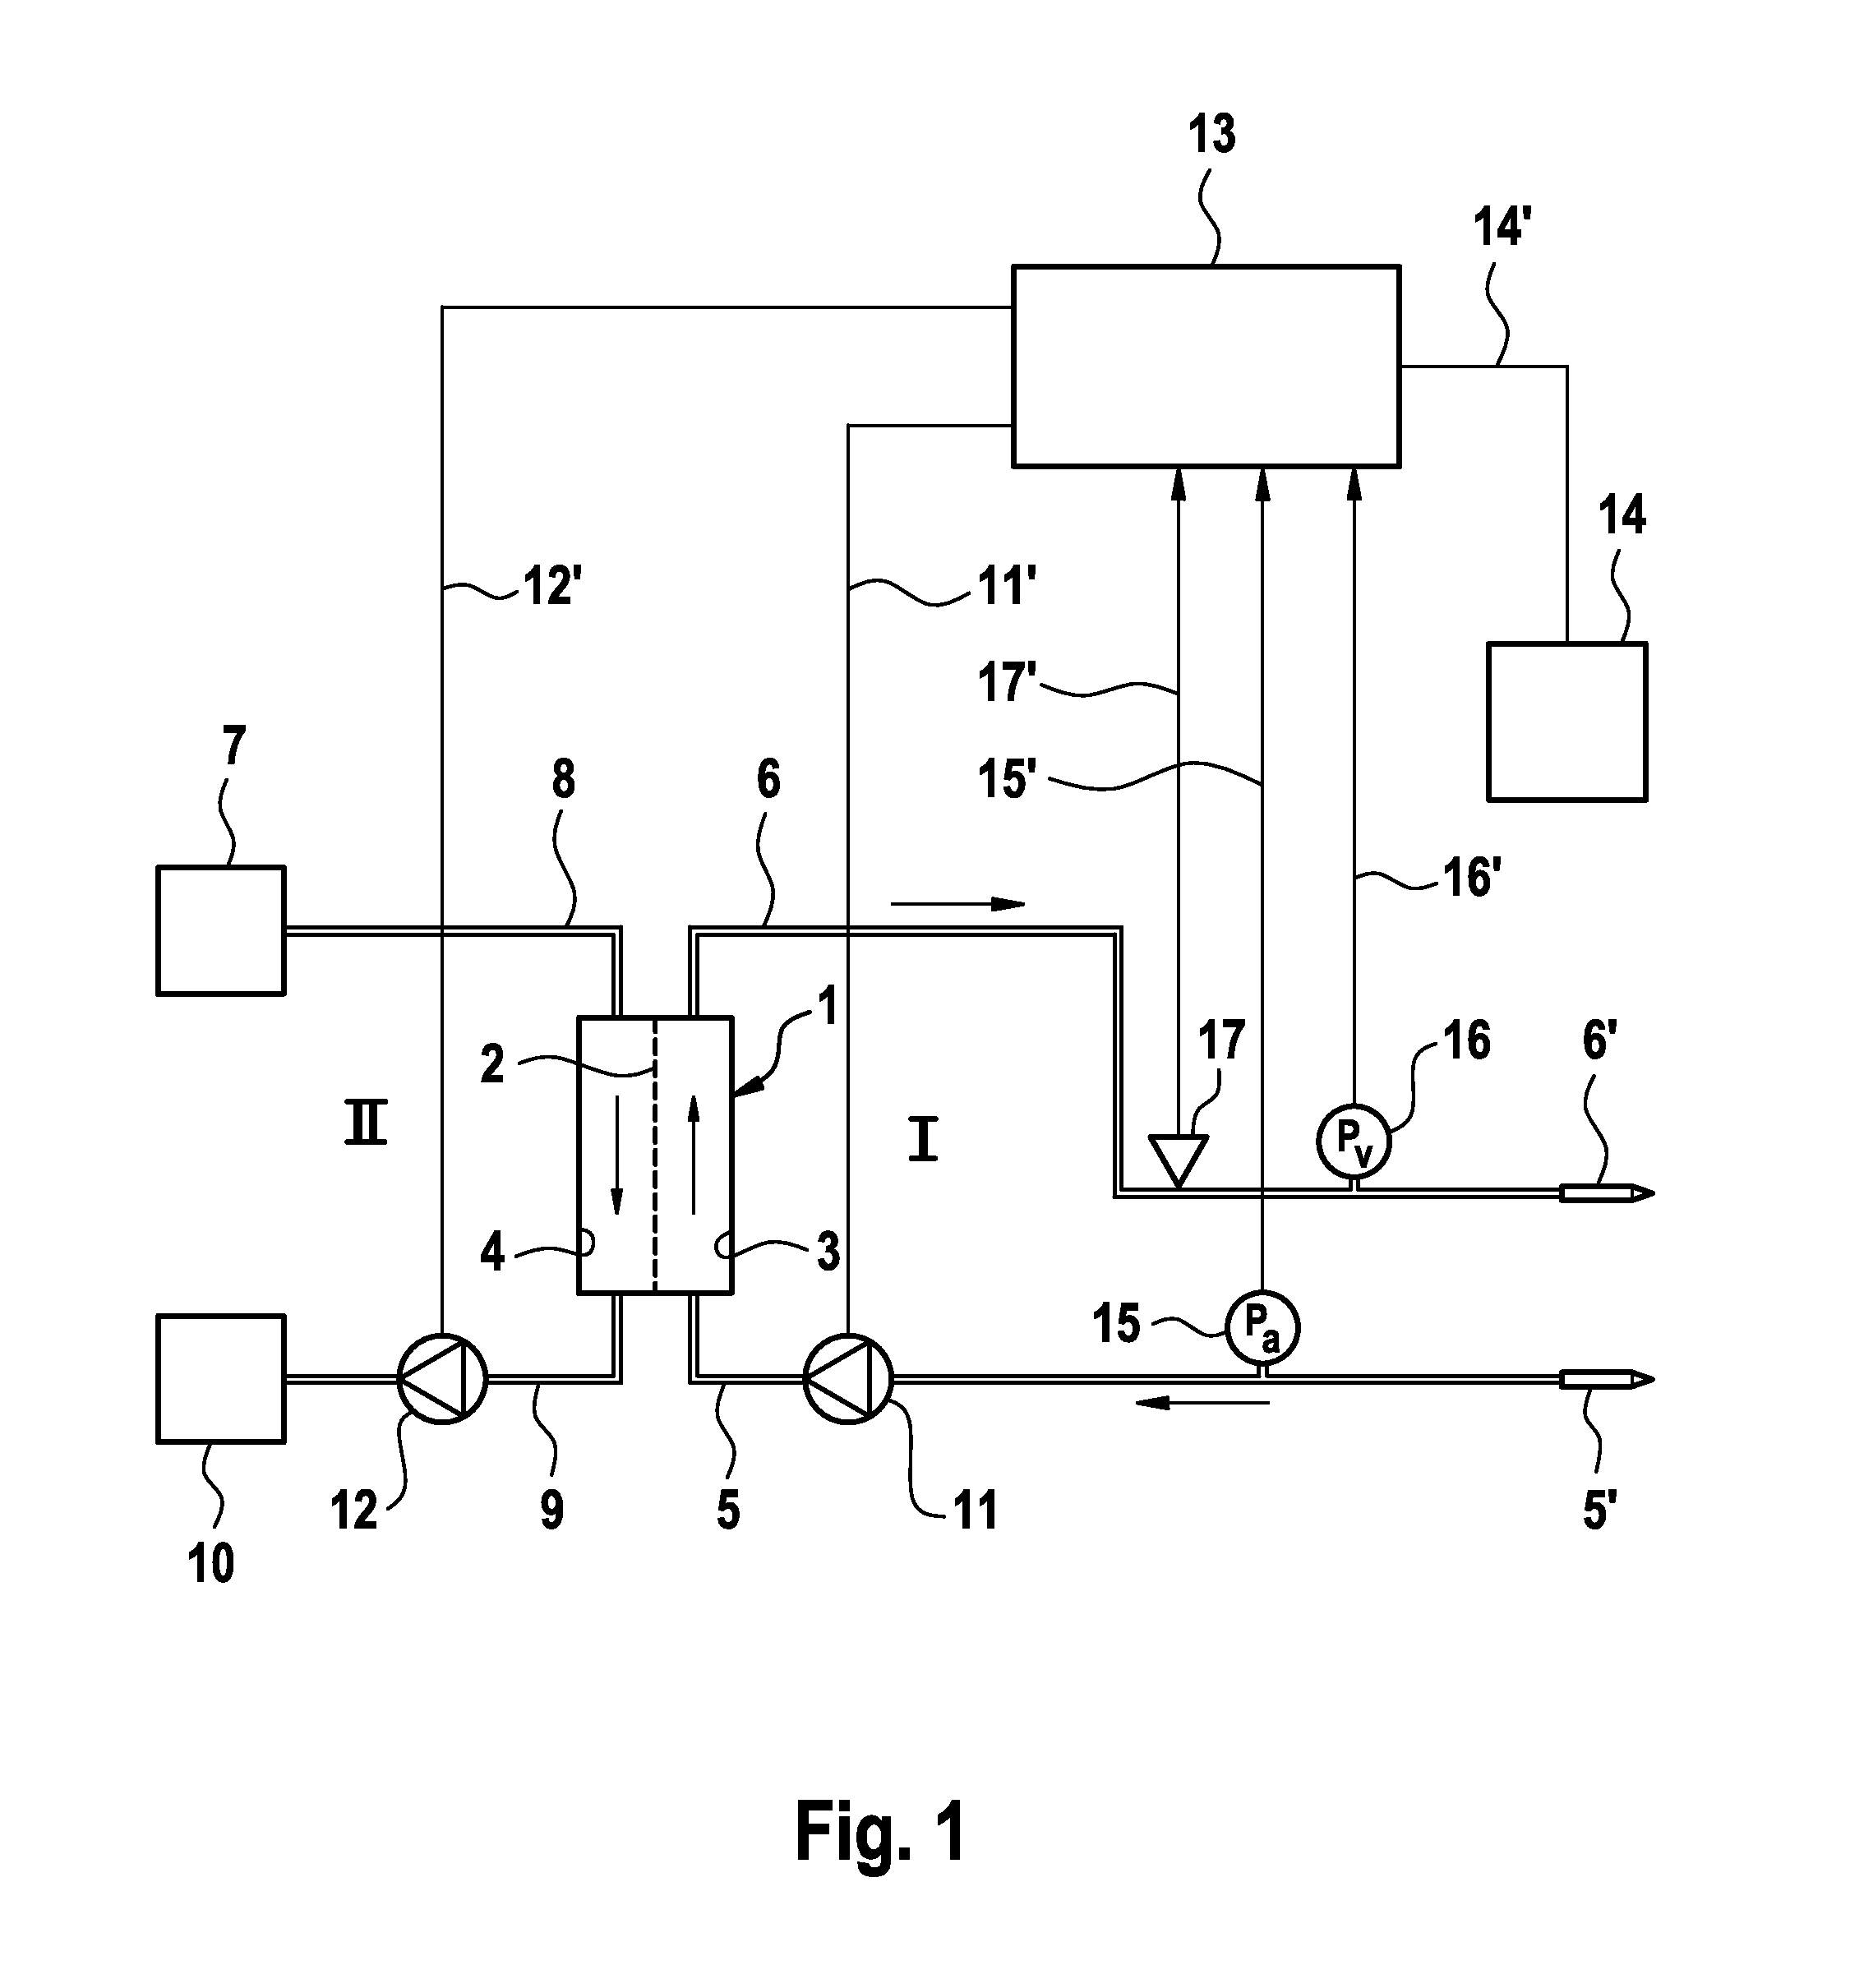 Apparatus for extra-corporeal blood treatment and method of determining a blood flow rate for an extra-corporeal blood treatment apparatus